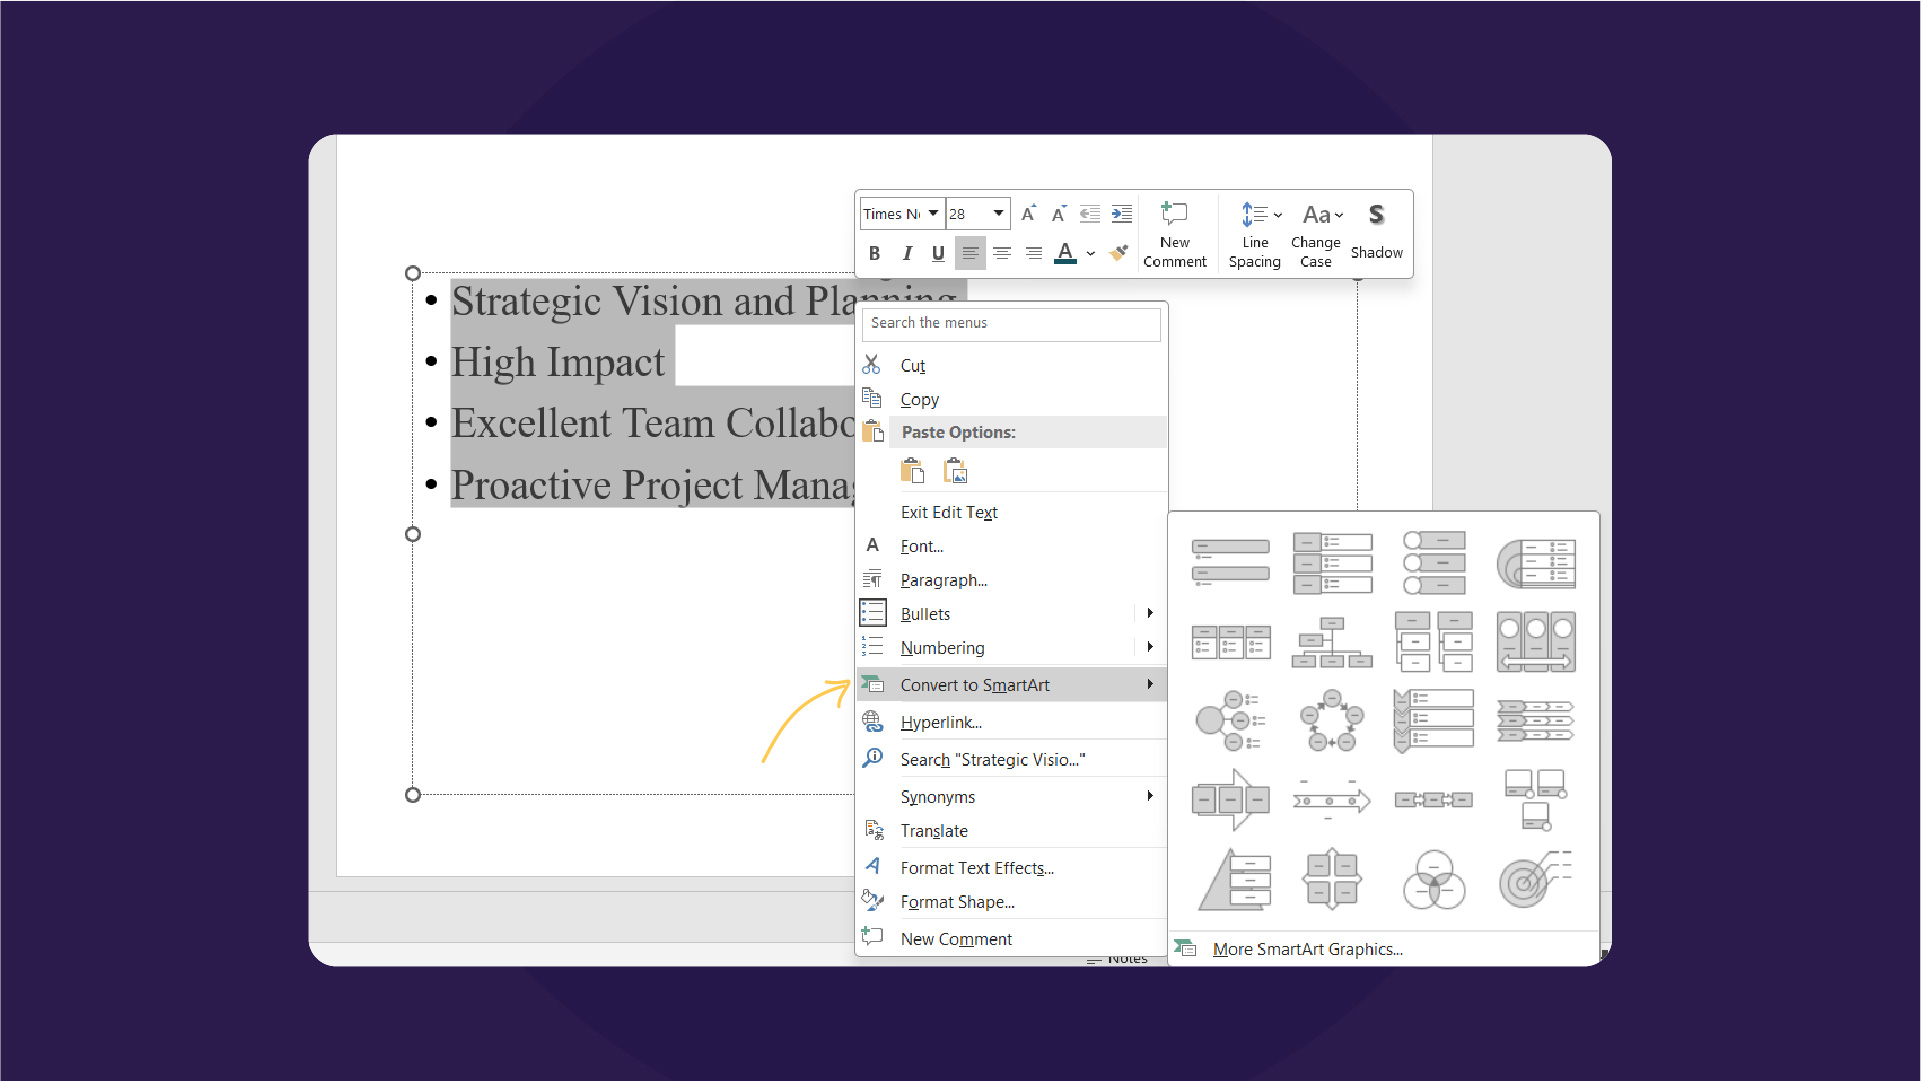 Converting to SmartArt in PowerPoint